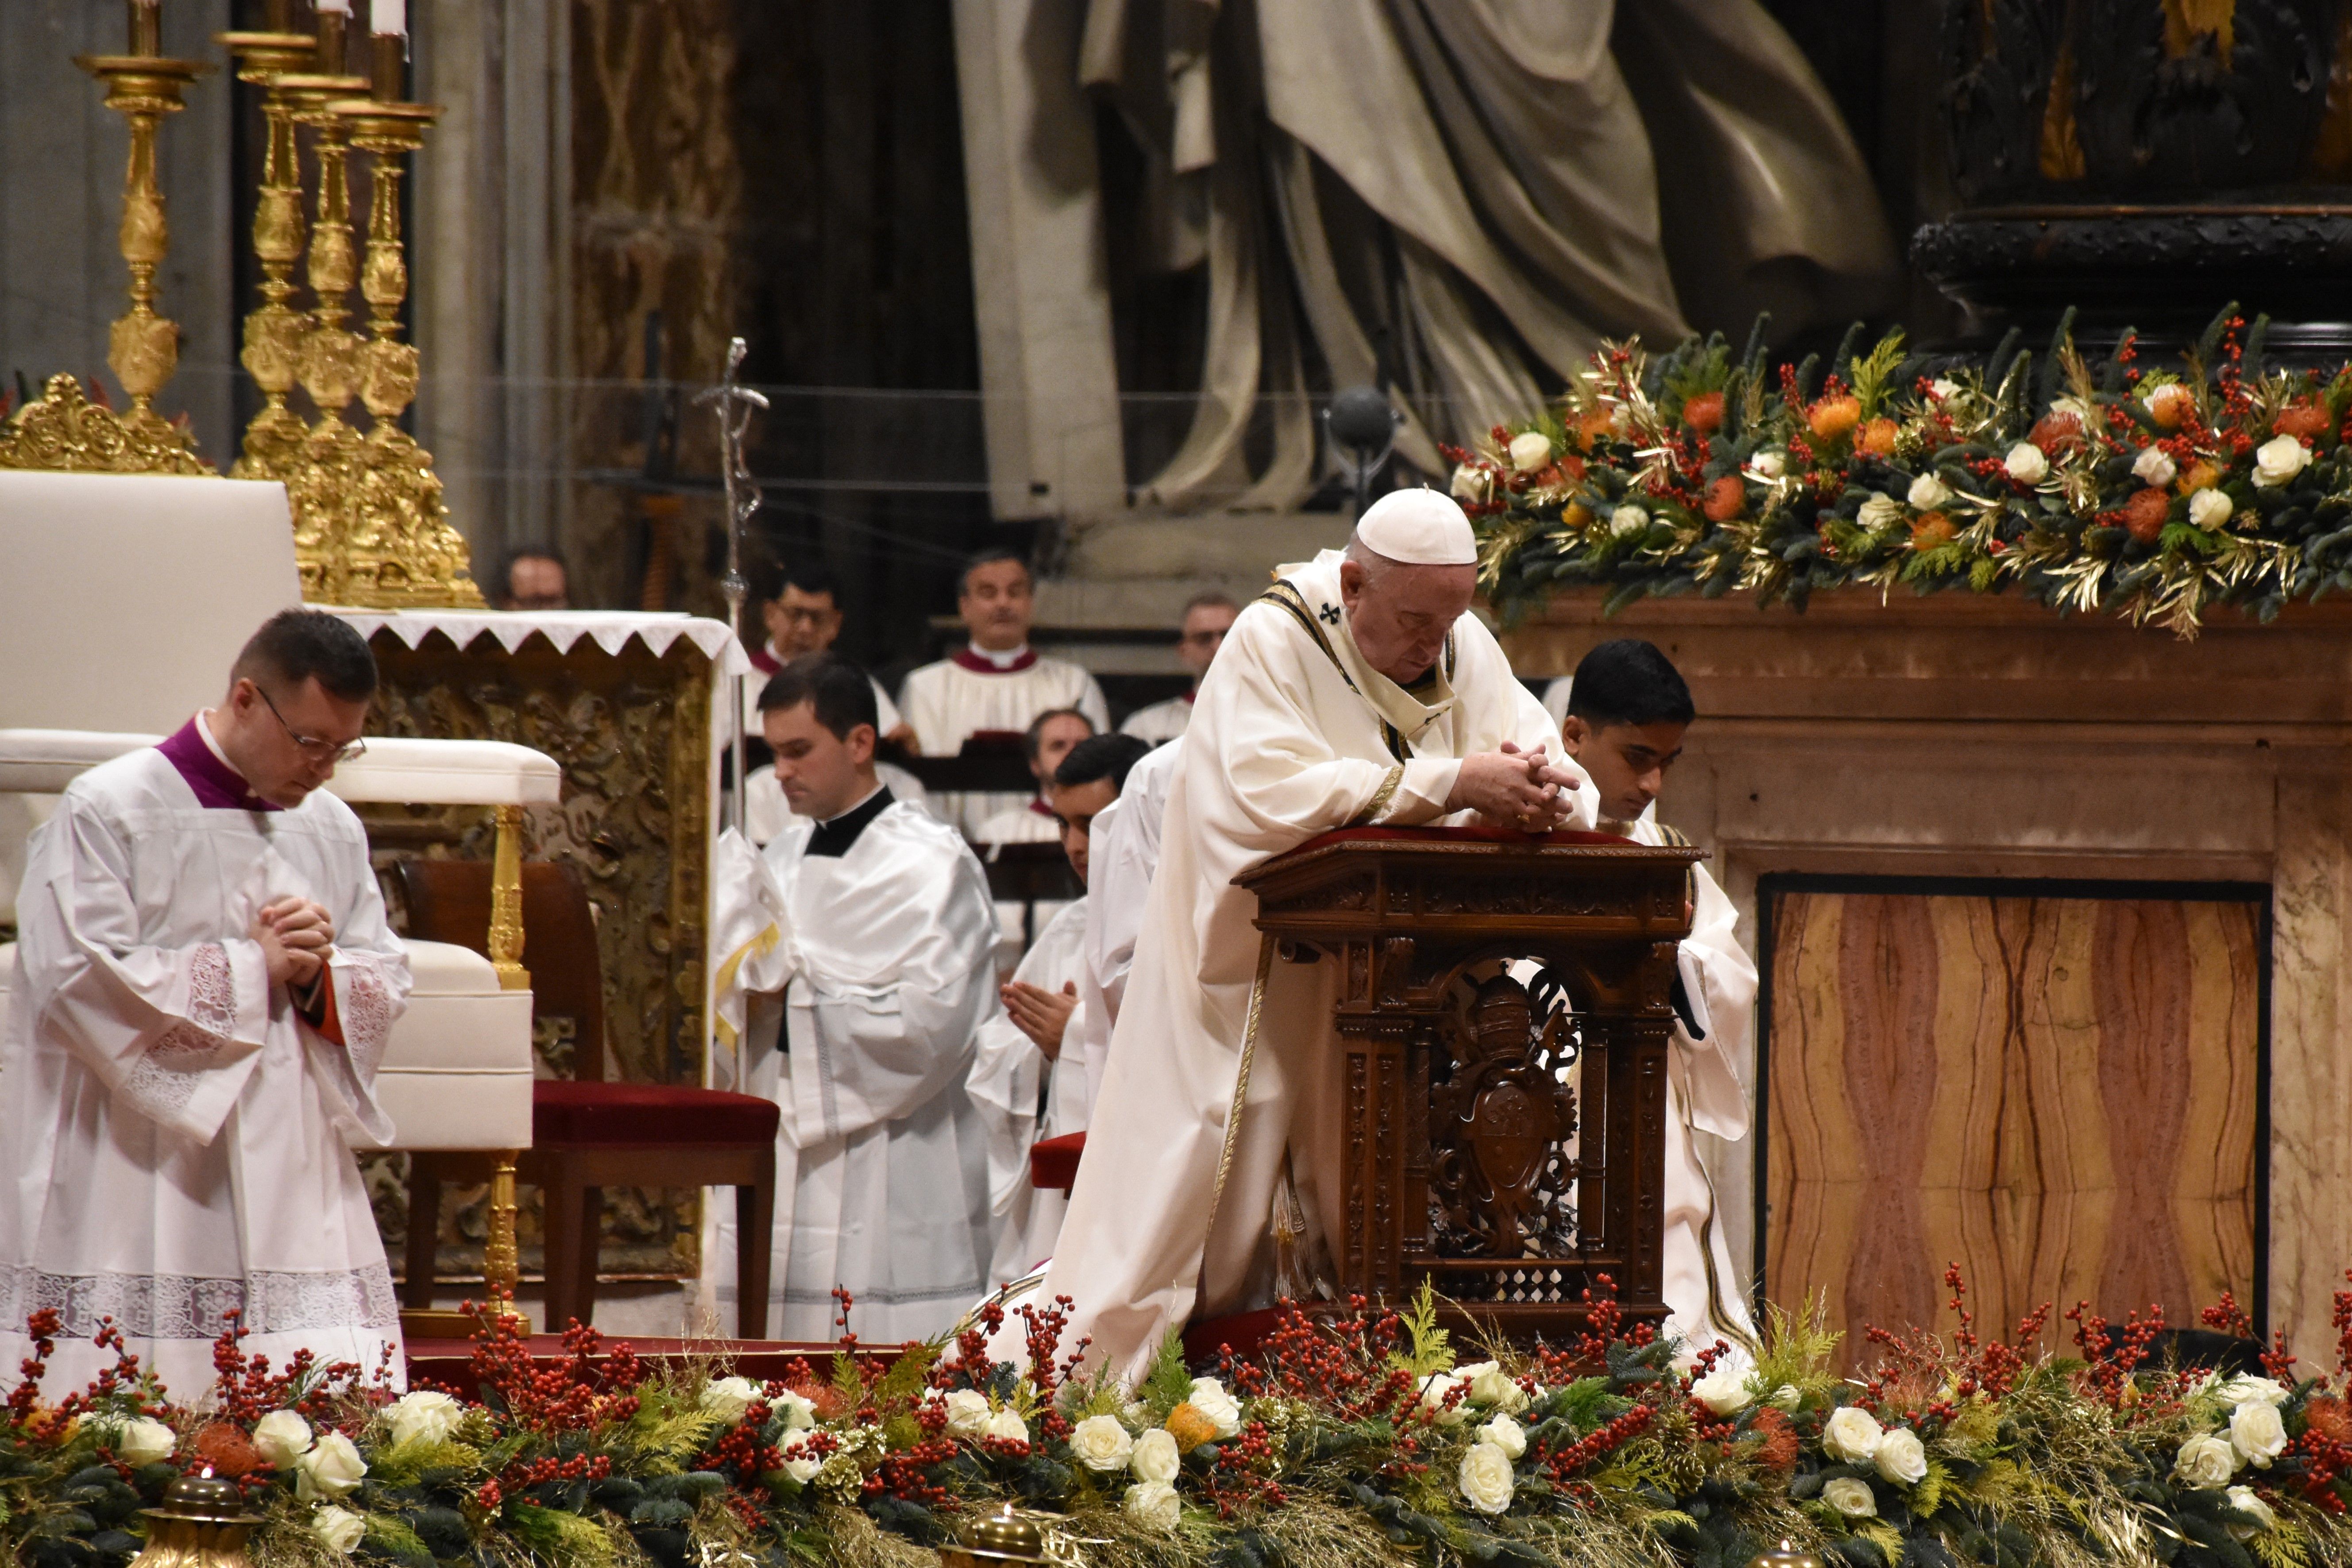  Pope Francis (Front) leads a mass on Christmas eve marking the birth of Jesus Christ on December 24, 2019, at St Peter's basilica in Vatican City, Vatican.